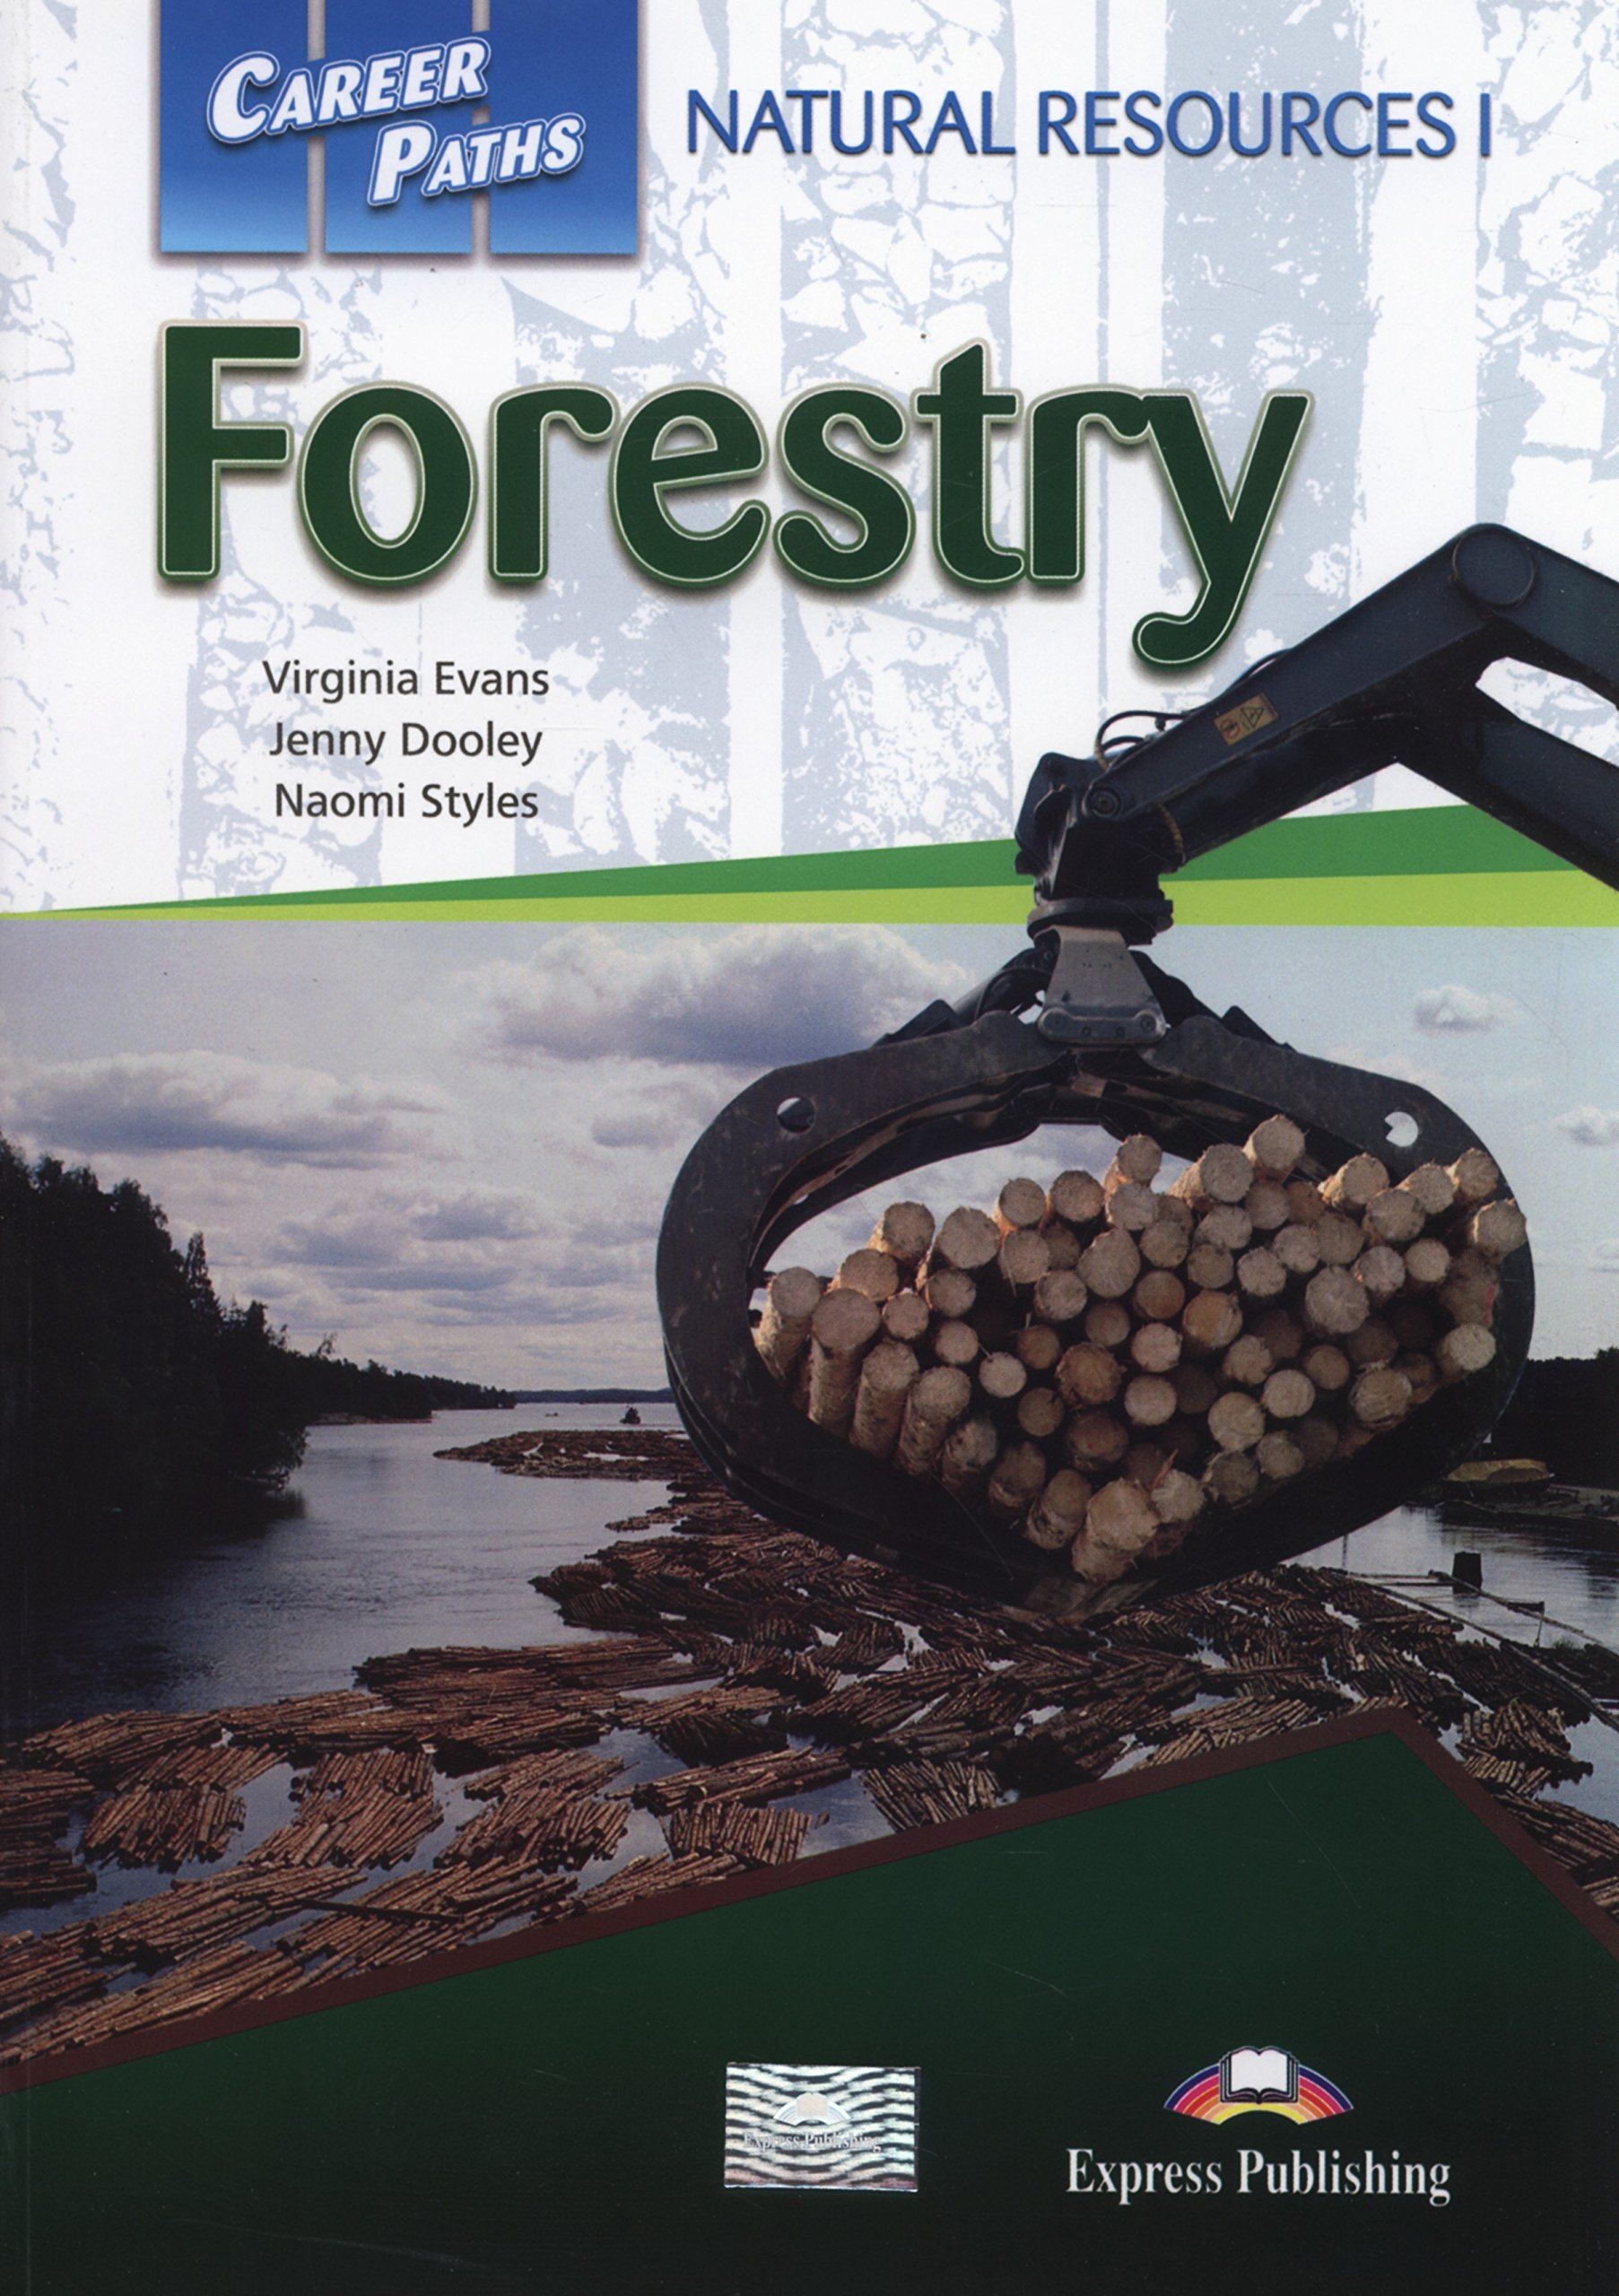 Career Paths Natural Resources 1 Forestry Student's Book + Digibook App / Учебник + онлайн-код